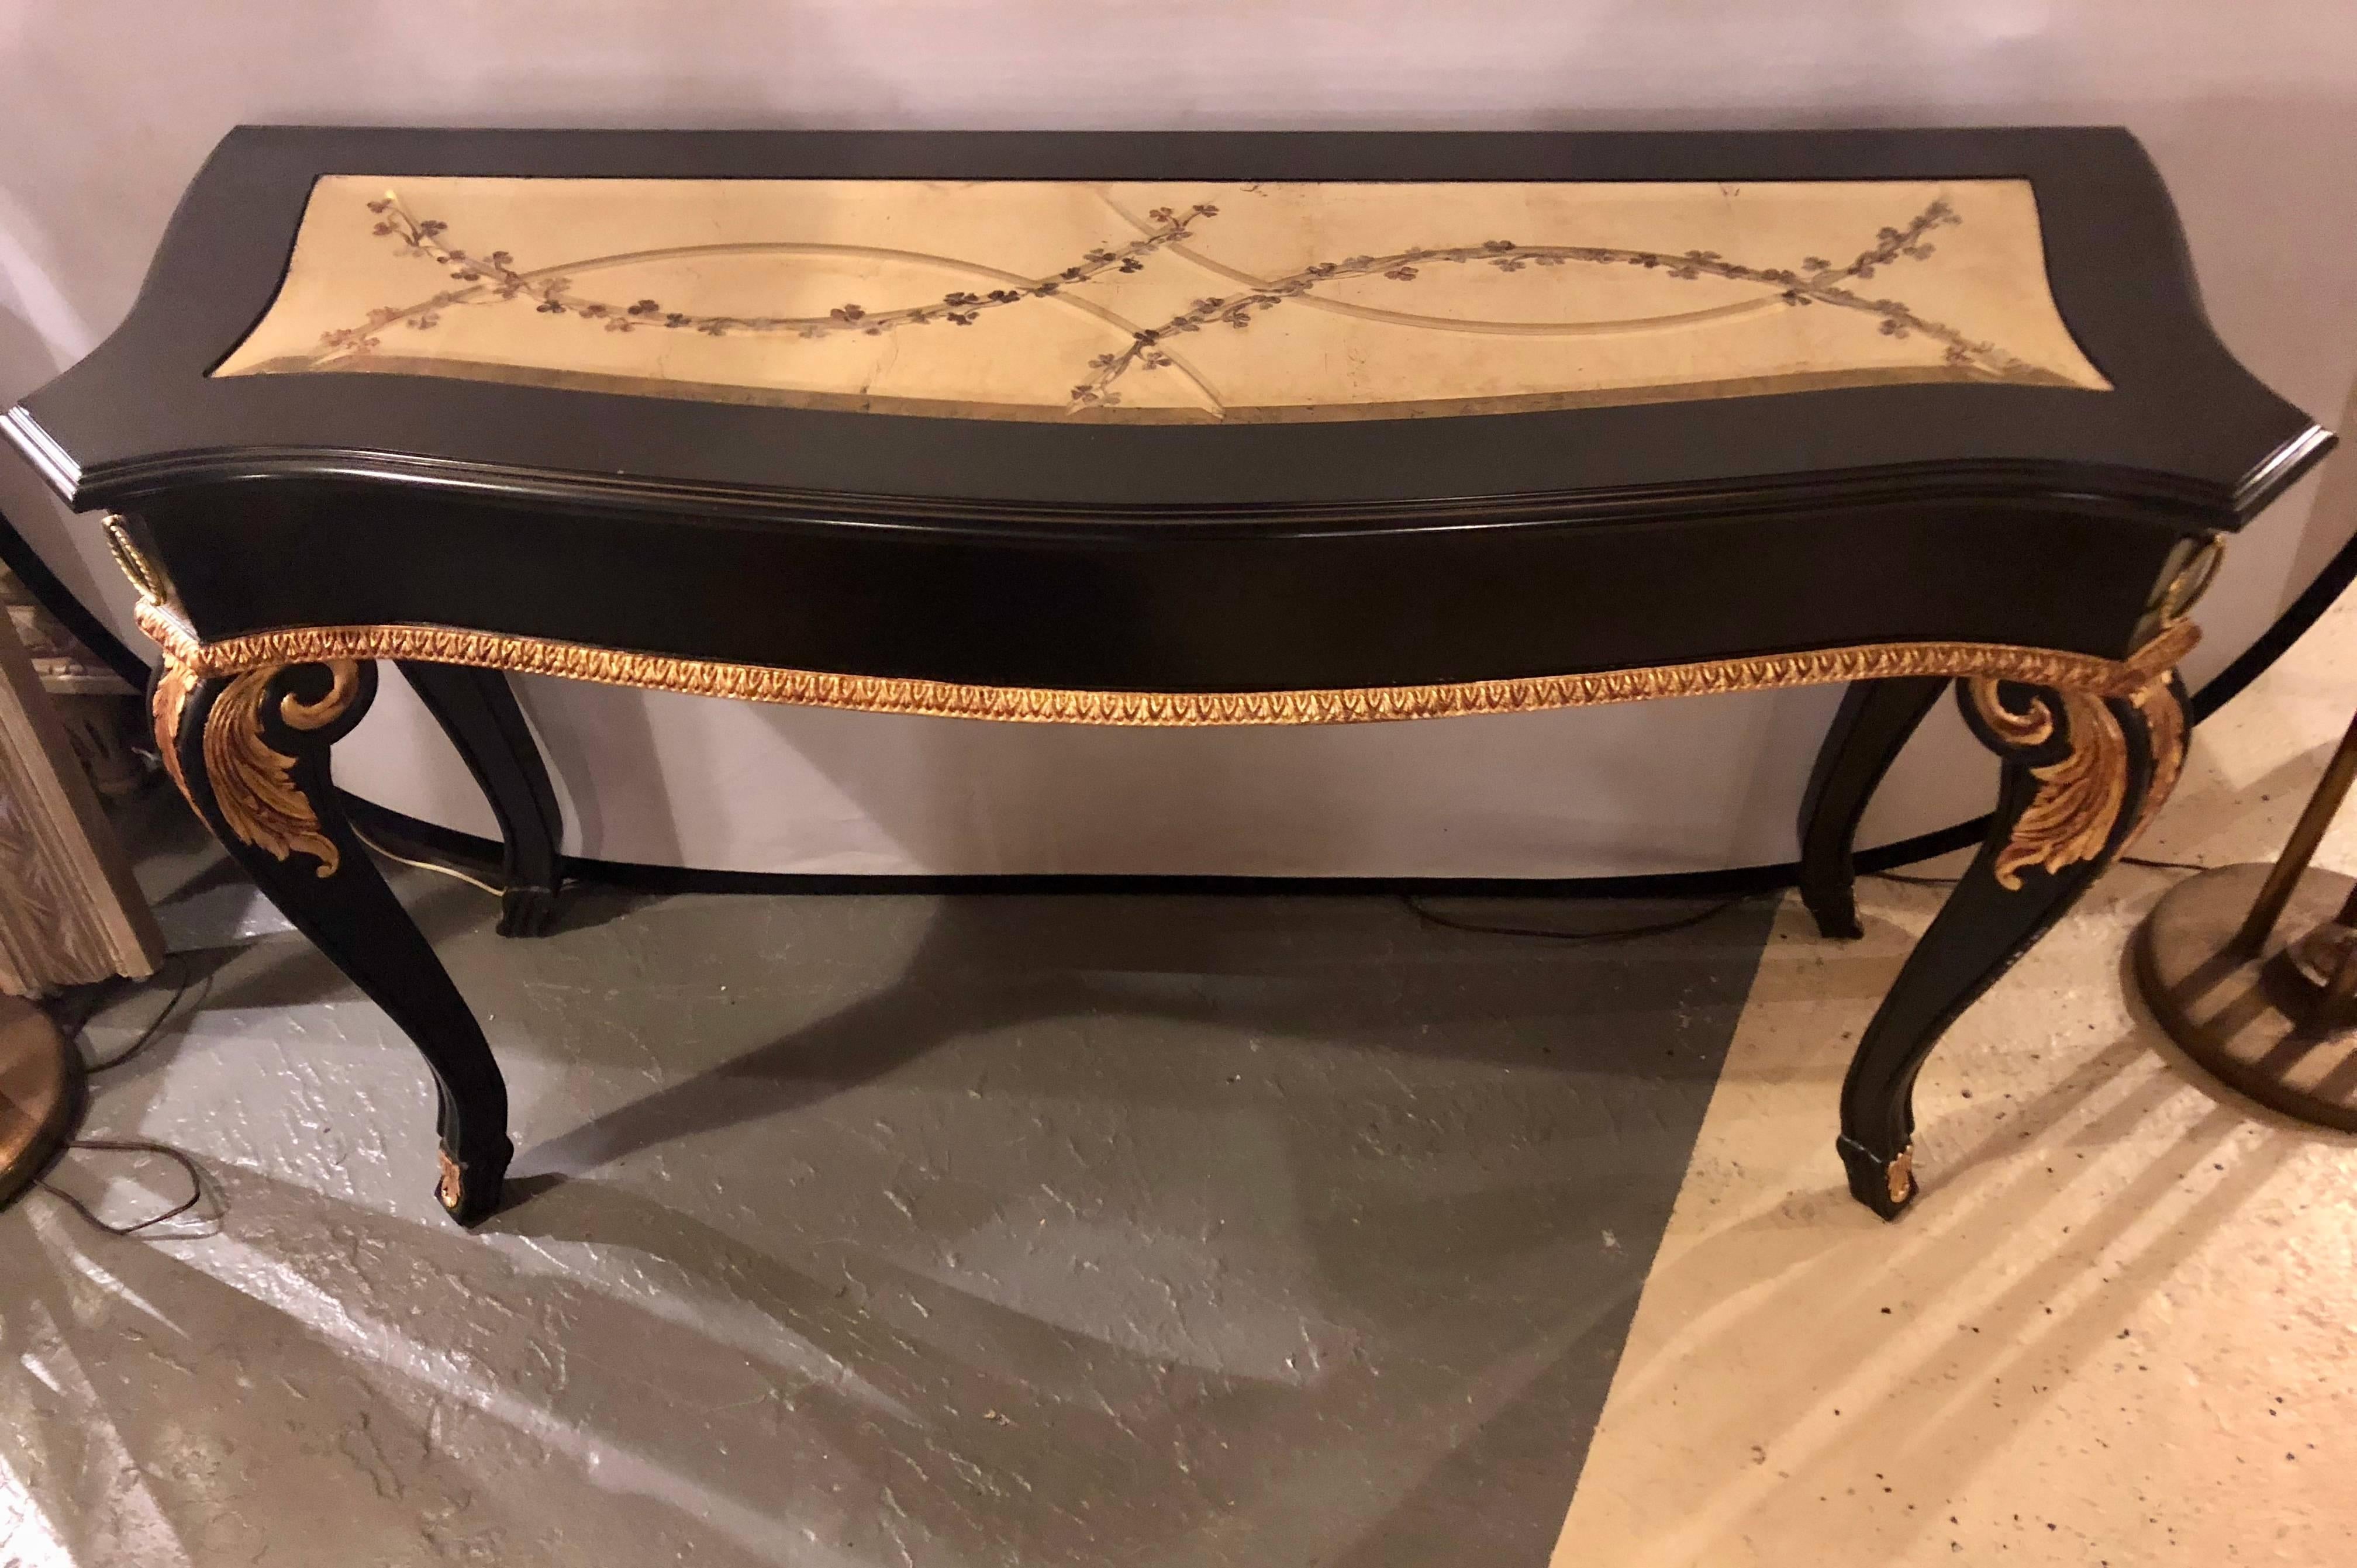 An ebony and parcel-gilt decorated console or sofa table with fine beveled gilt glass top in the Hollywood Regency fashion.